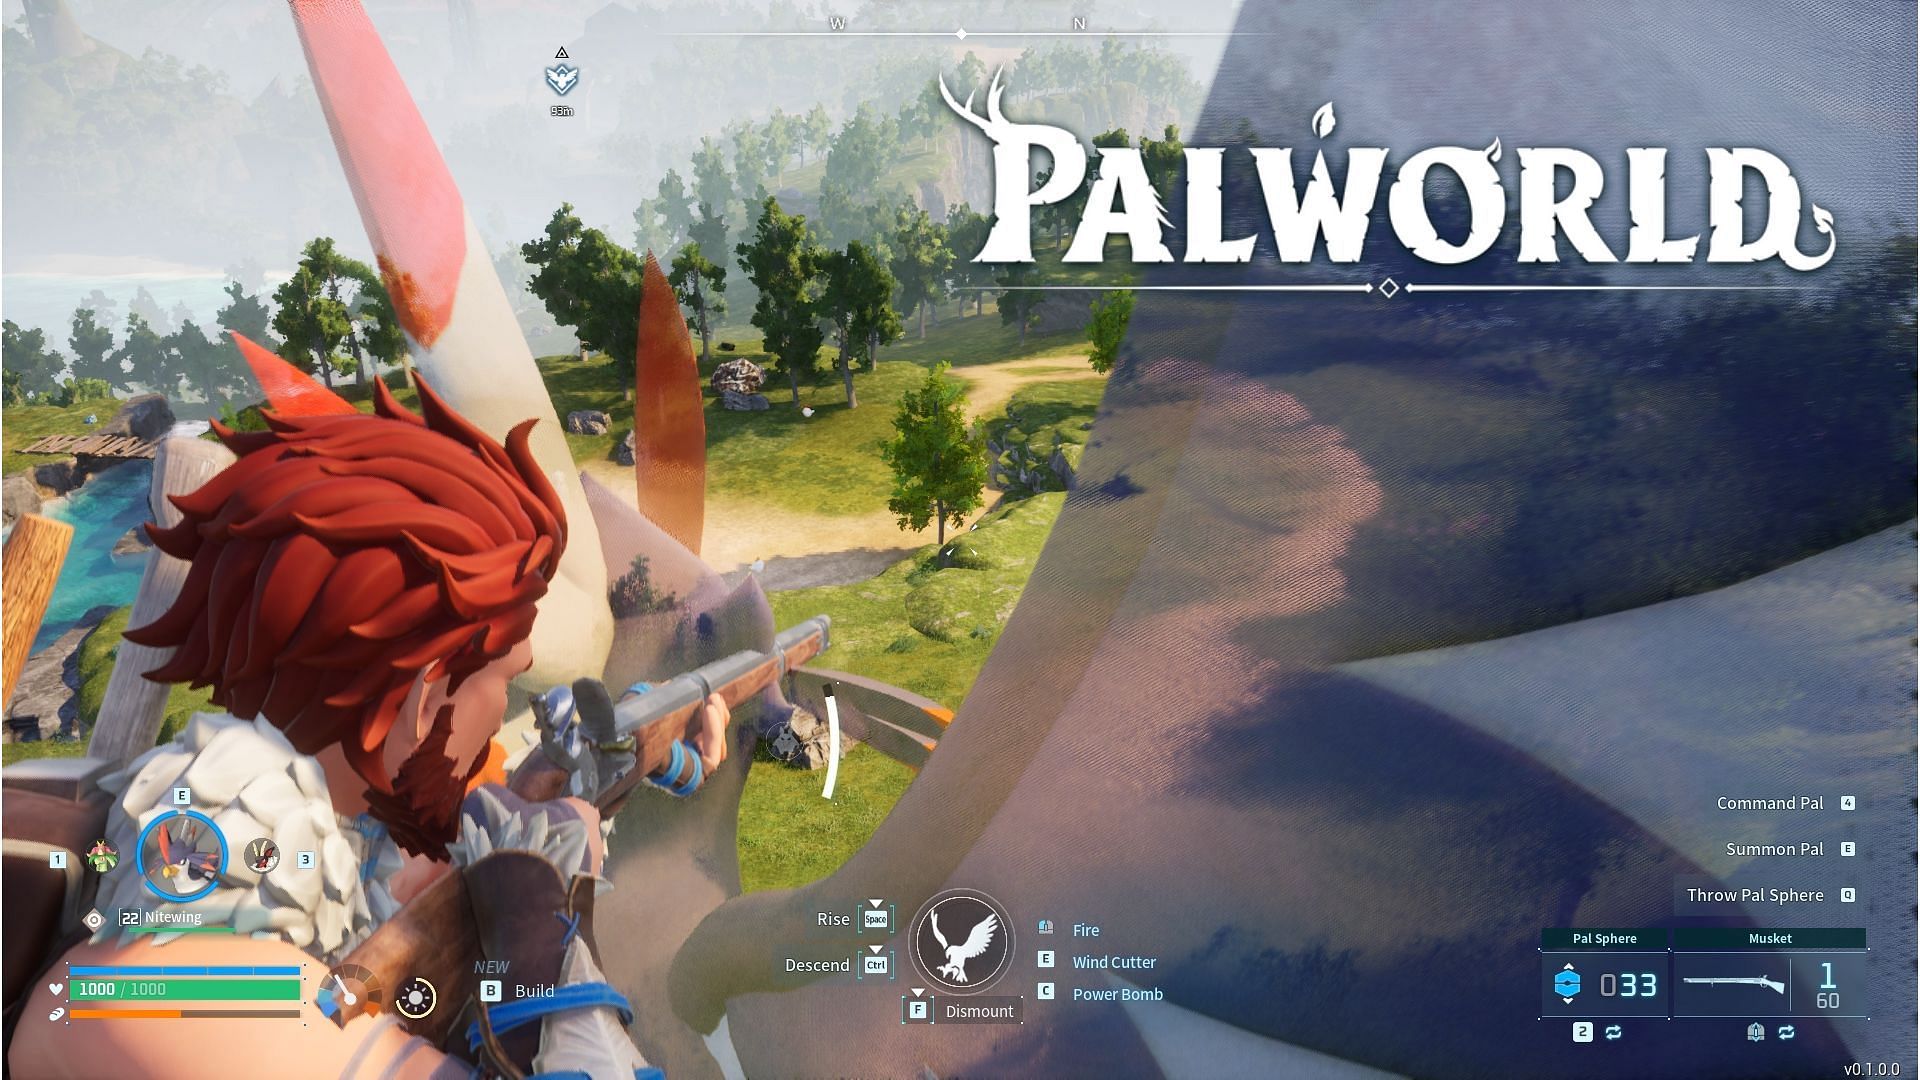 Unlock and craft guns to use them while riding on Pals in Palworld.